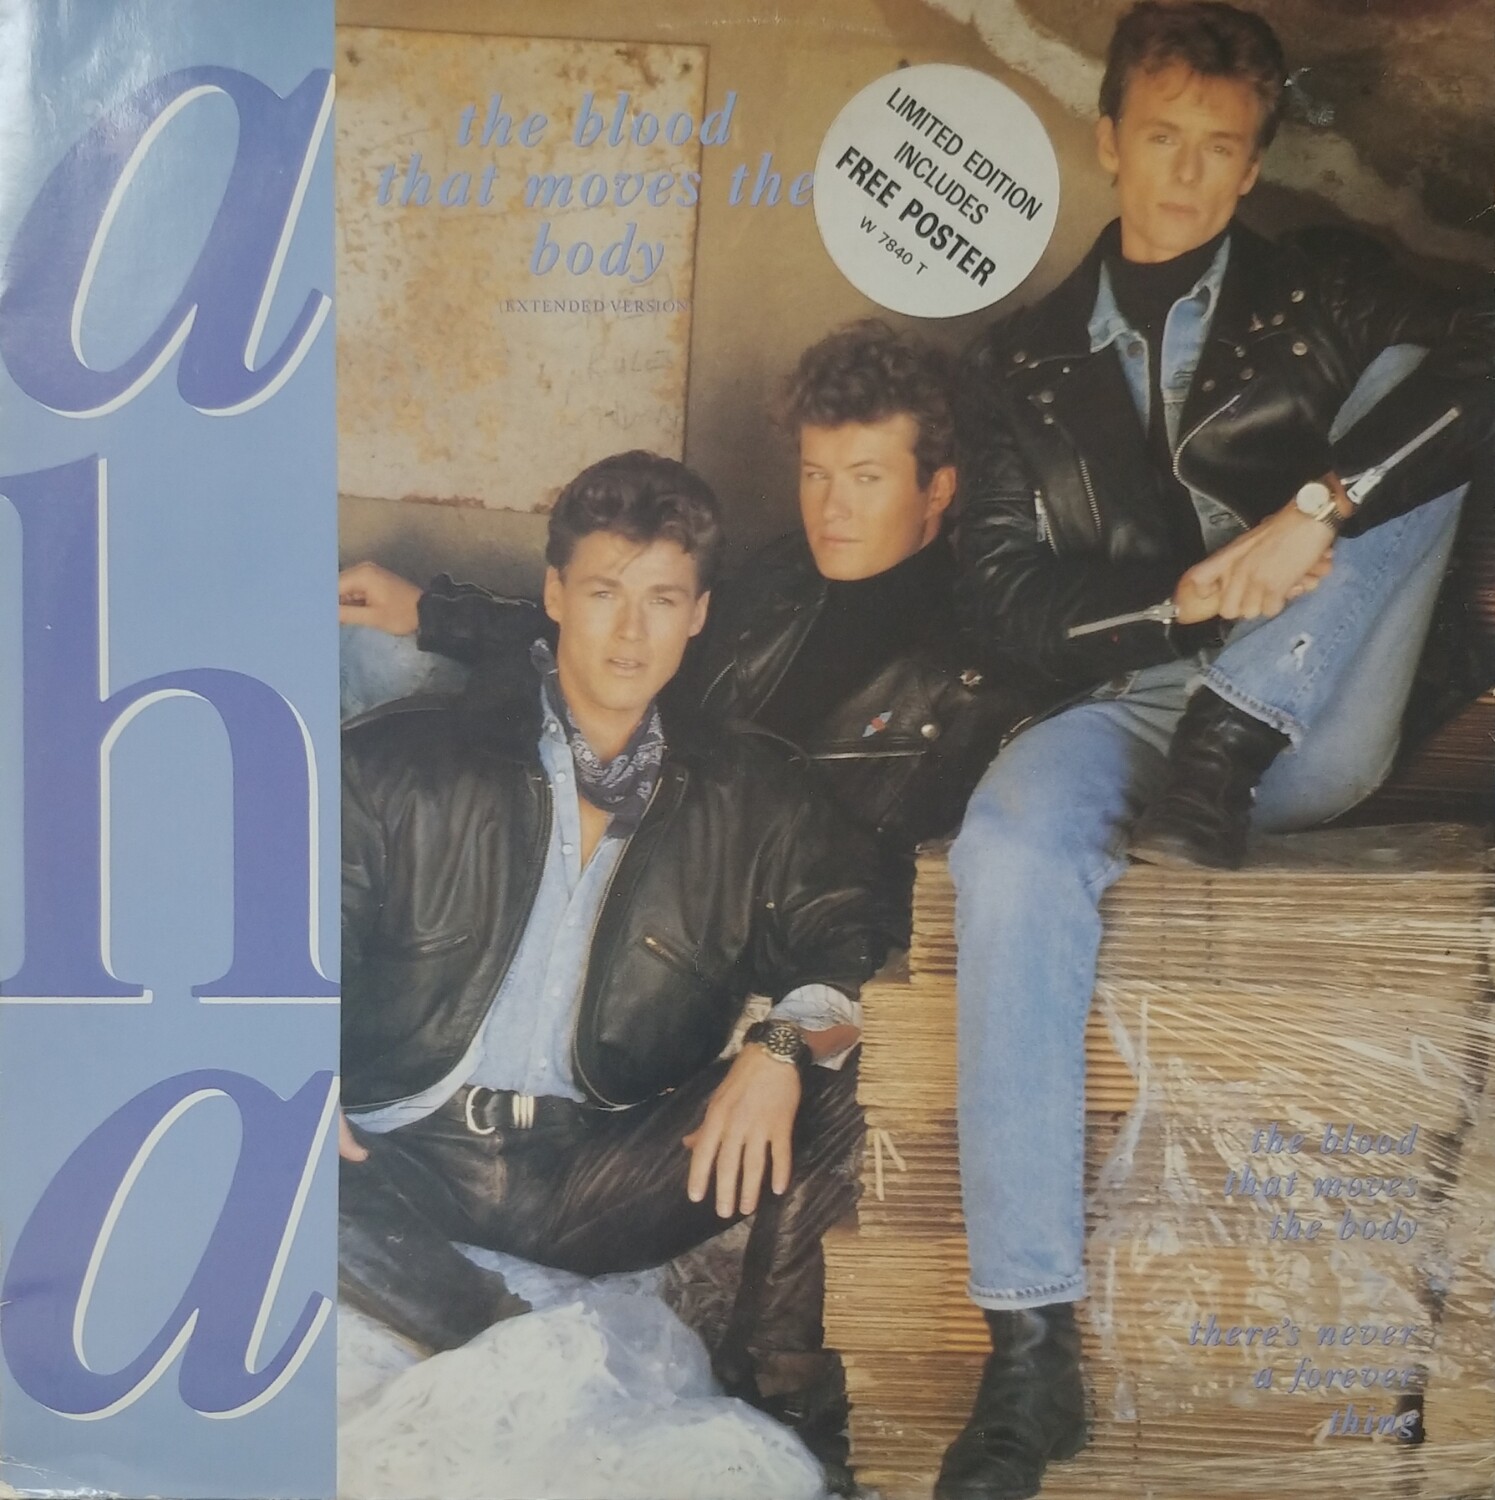 A-HA - The blood that move the body